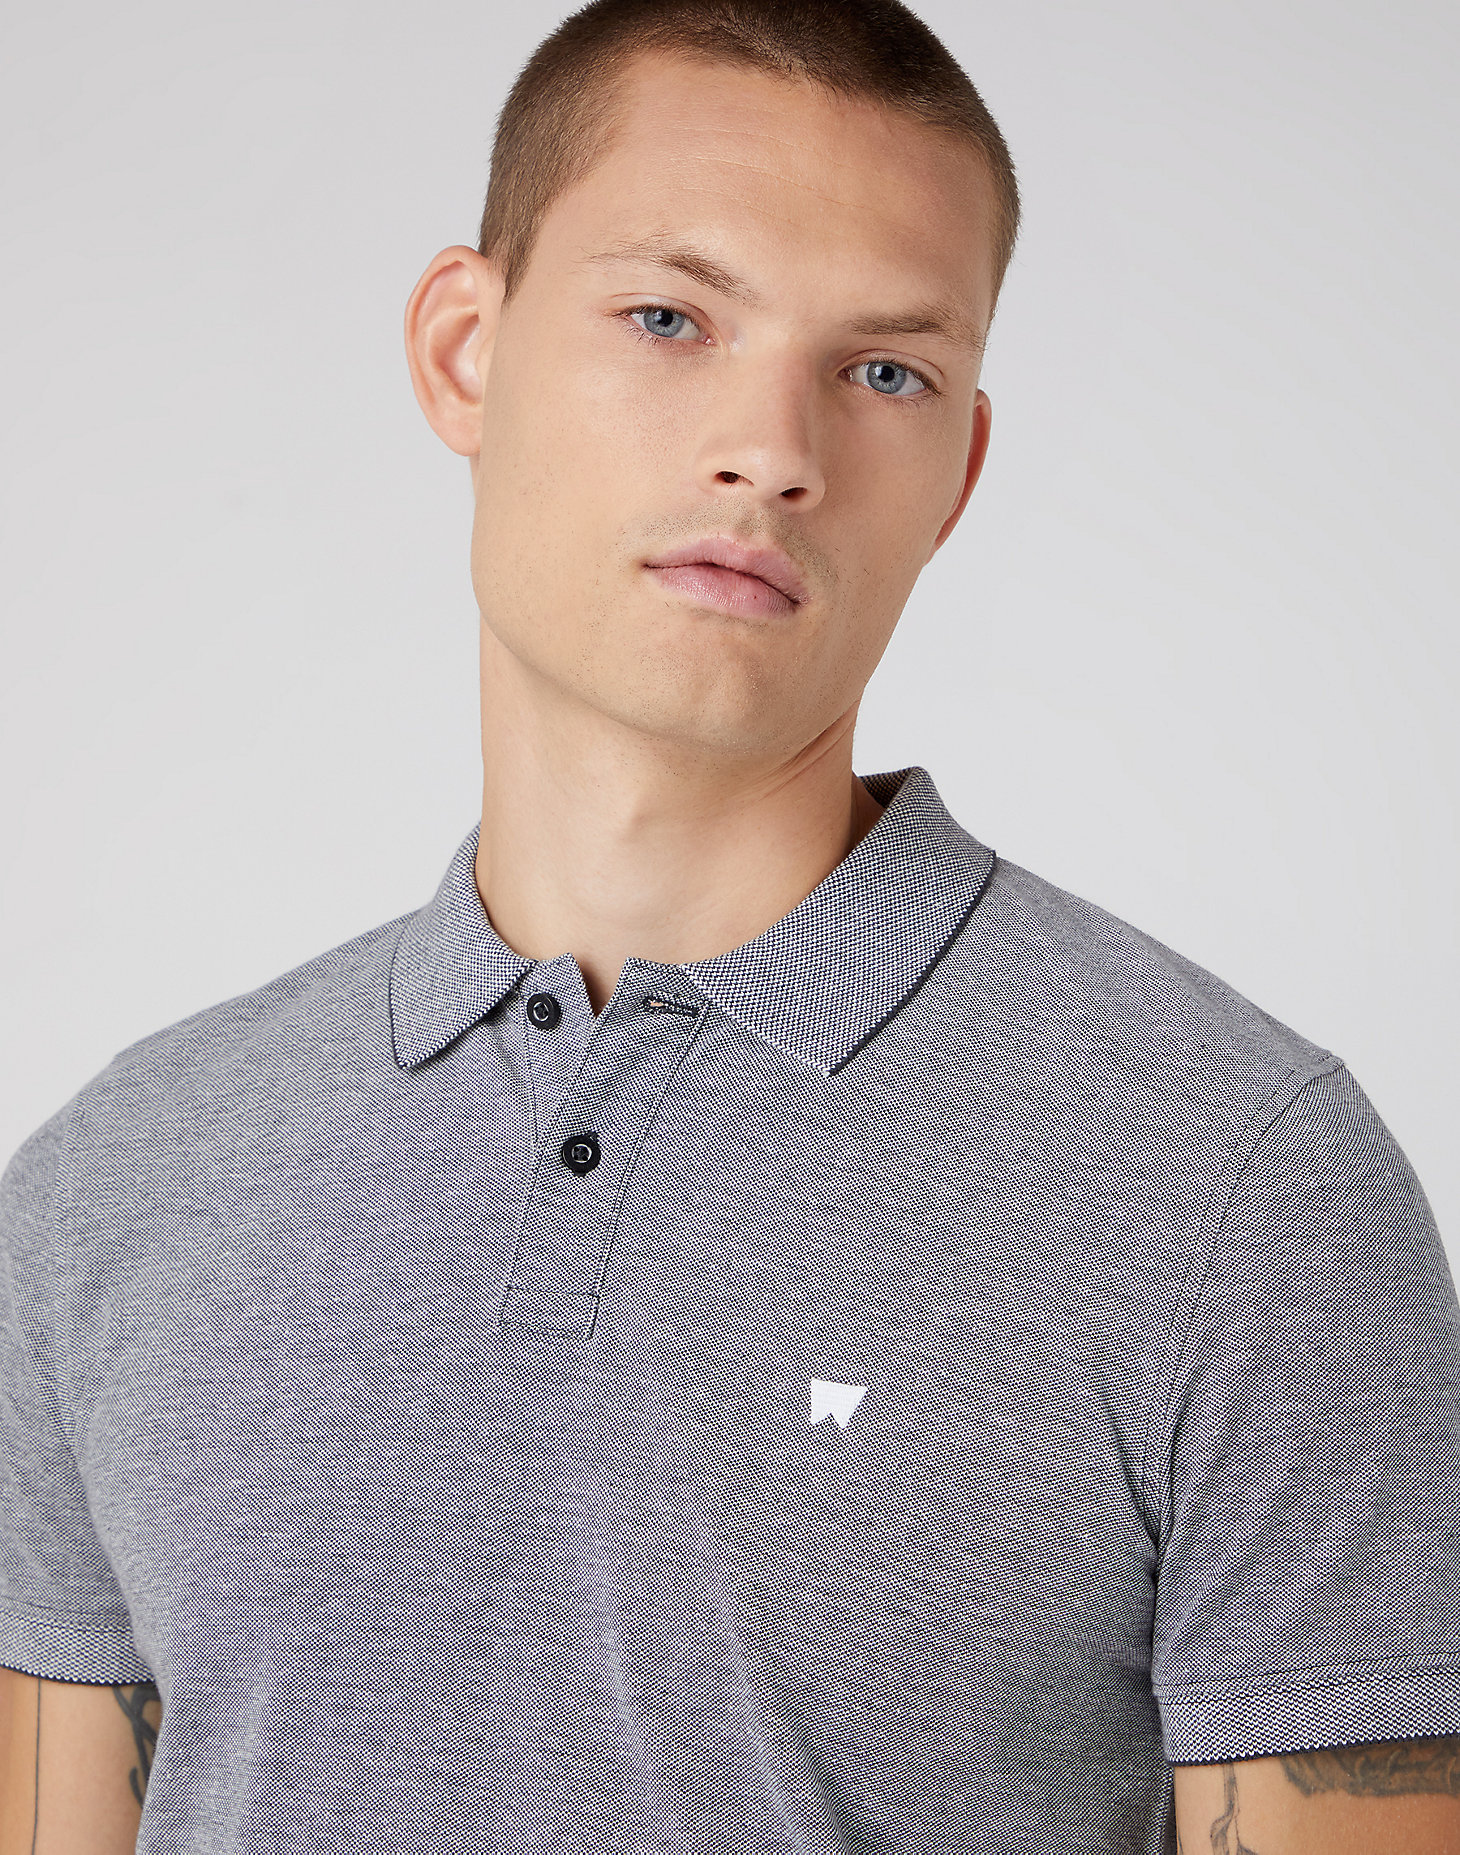 Refined Polo Shirt in Faded Black alternative view 3